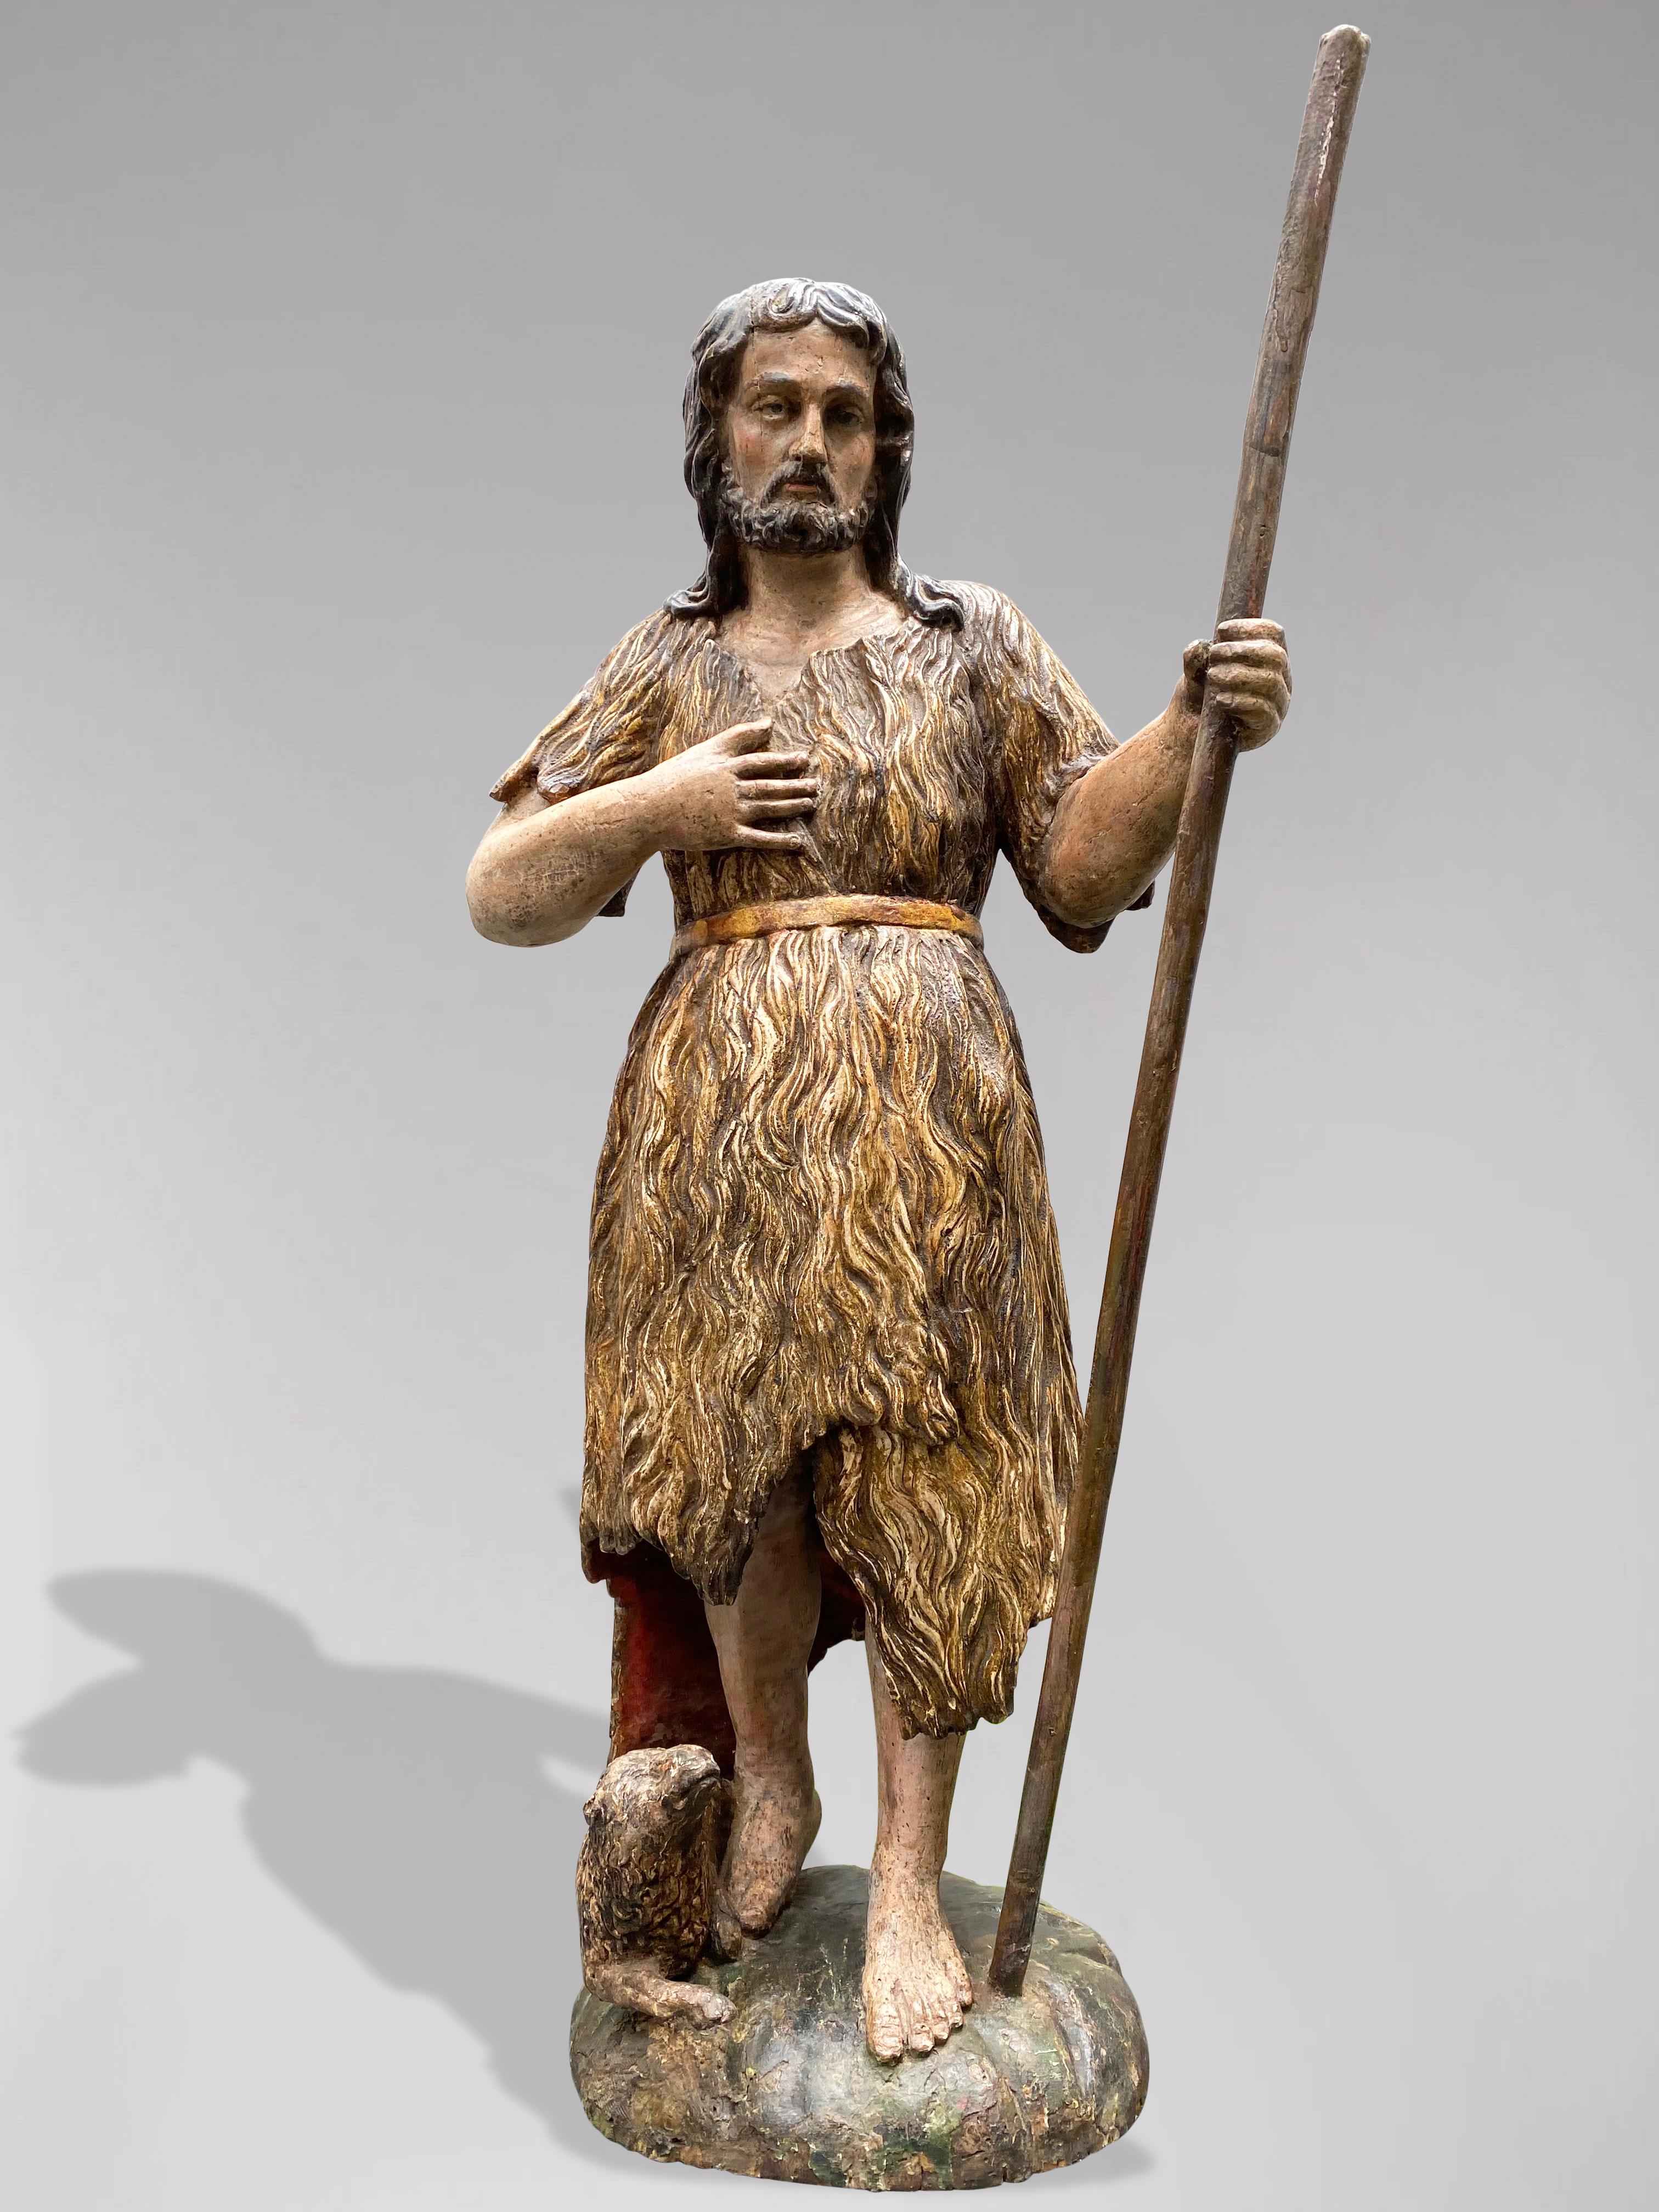 Unknown Figurative Sculpture - A French Statue of Saint John the Baptist, Circa 1700, polychromed wood